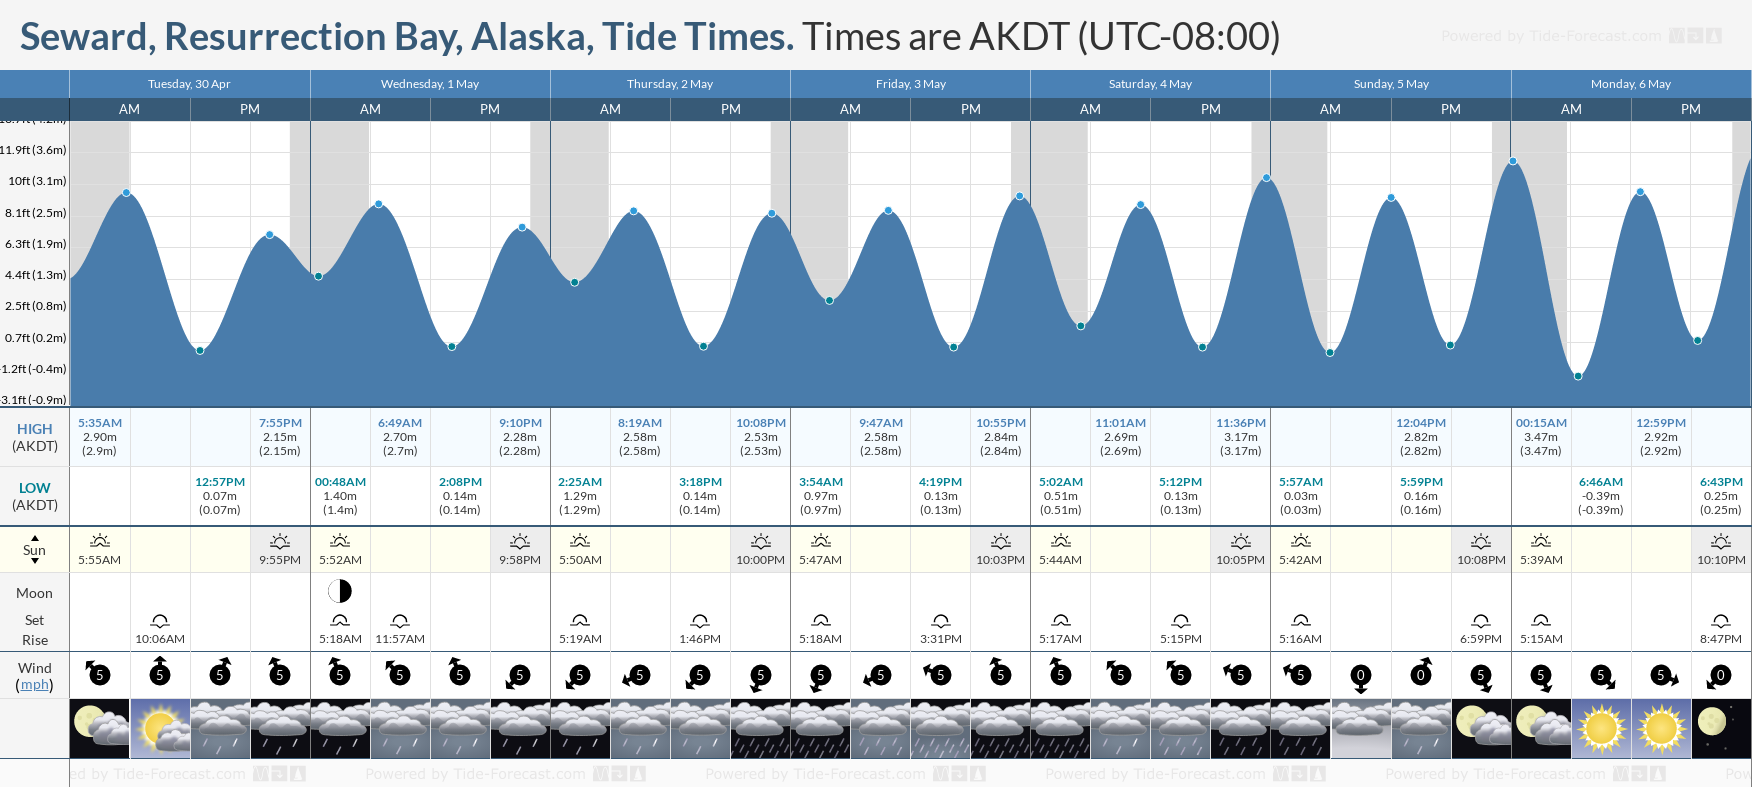 Seward, Resurrection Bay, Alaska Tide Chart including high and low tide tide times for the next 7 days